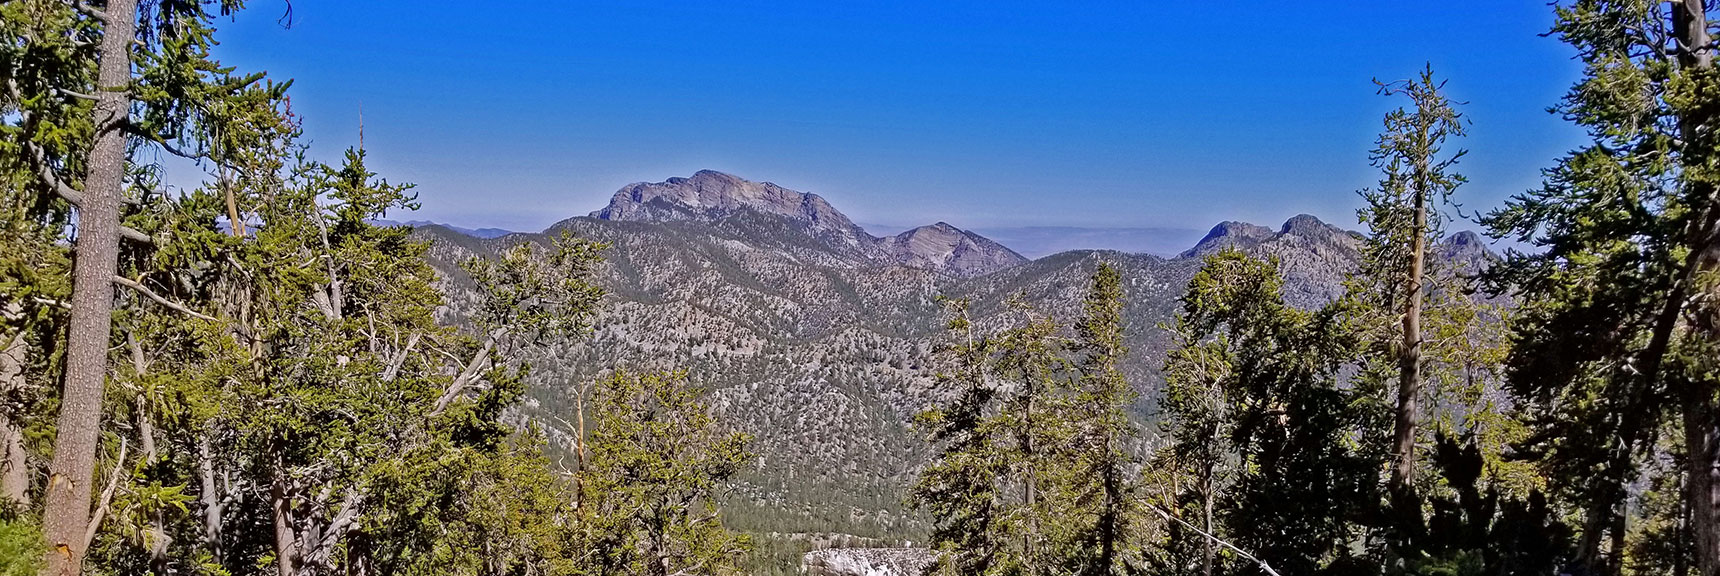 View Down Upper Foxtail Canyon to McFarland Peak, Reference Point for Return Trip | Lee to Kyle Canyon | Foxtail Approach | Mt Charleston Wilderness | Spring Mountains, Nevada